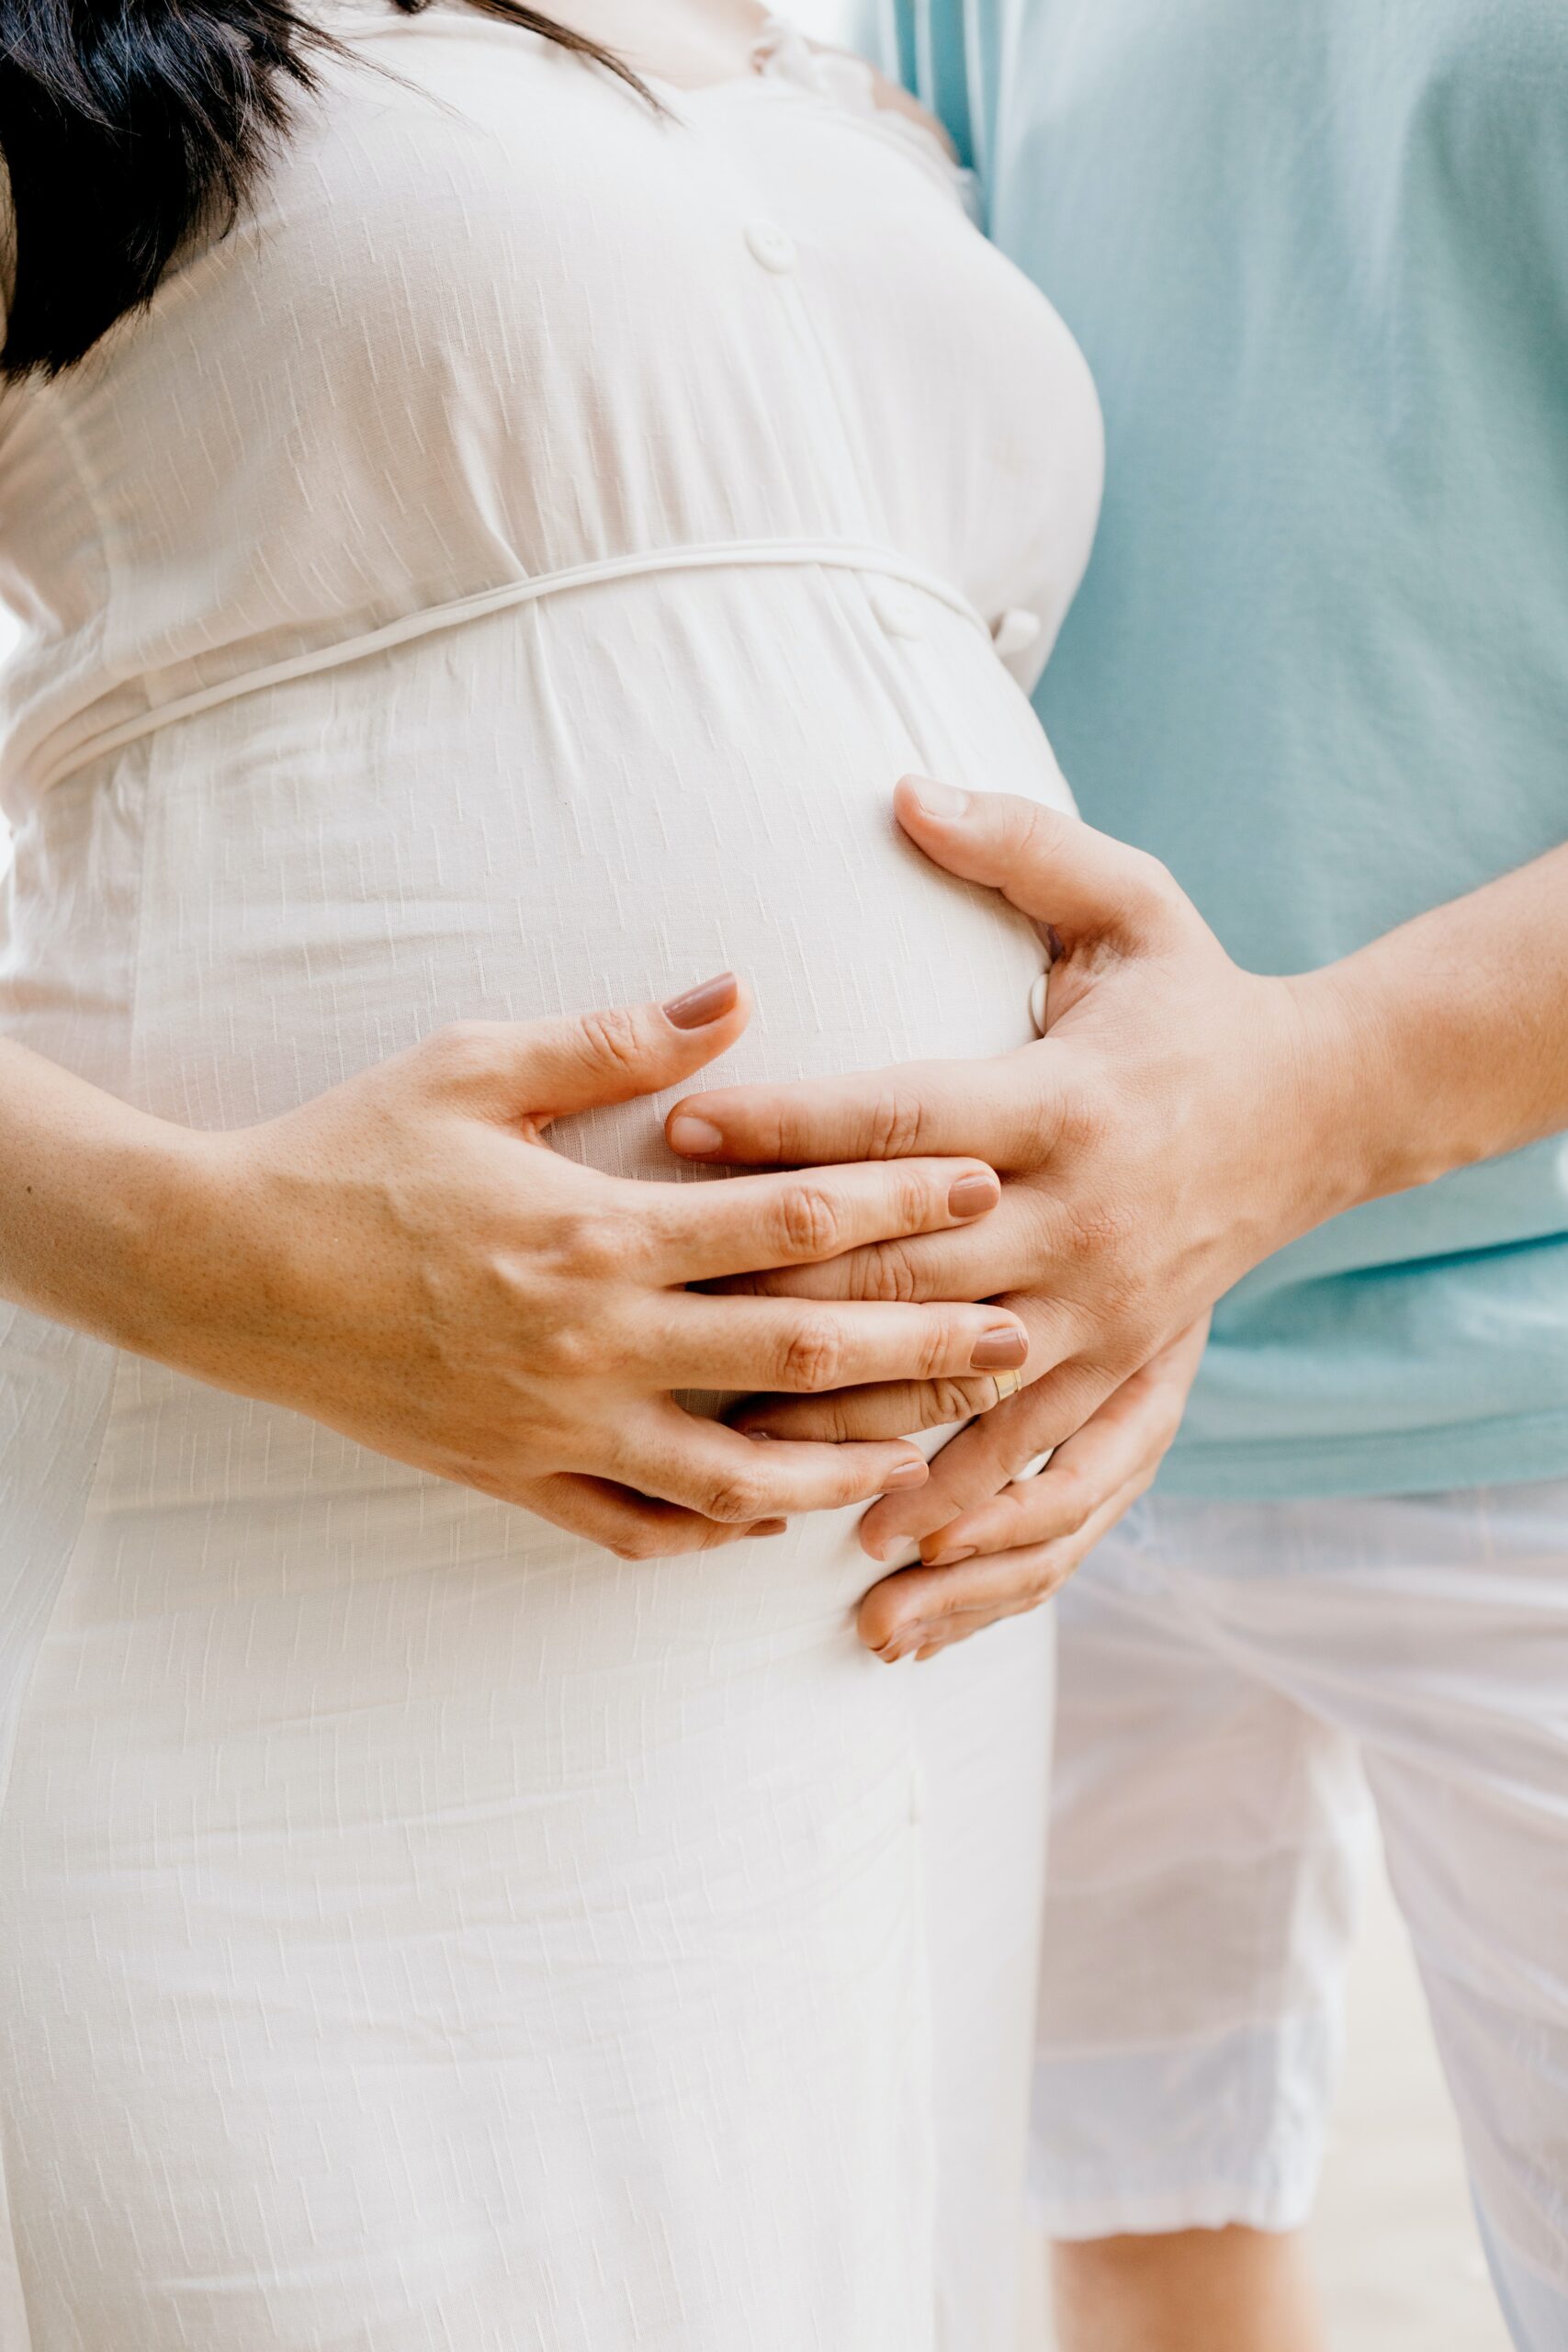 Pregnant women that is newly diagnosed with gestational diabetes in white dress holding stomach standing next to man in blue shirt.